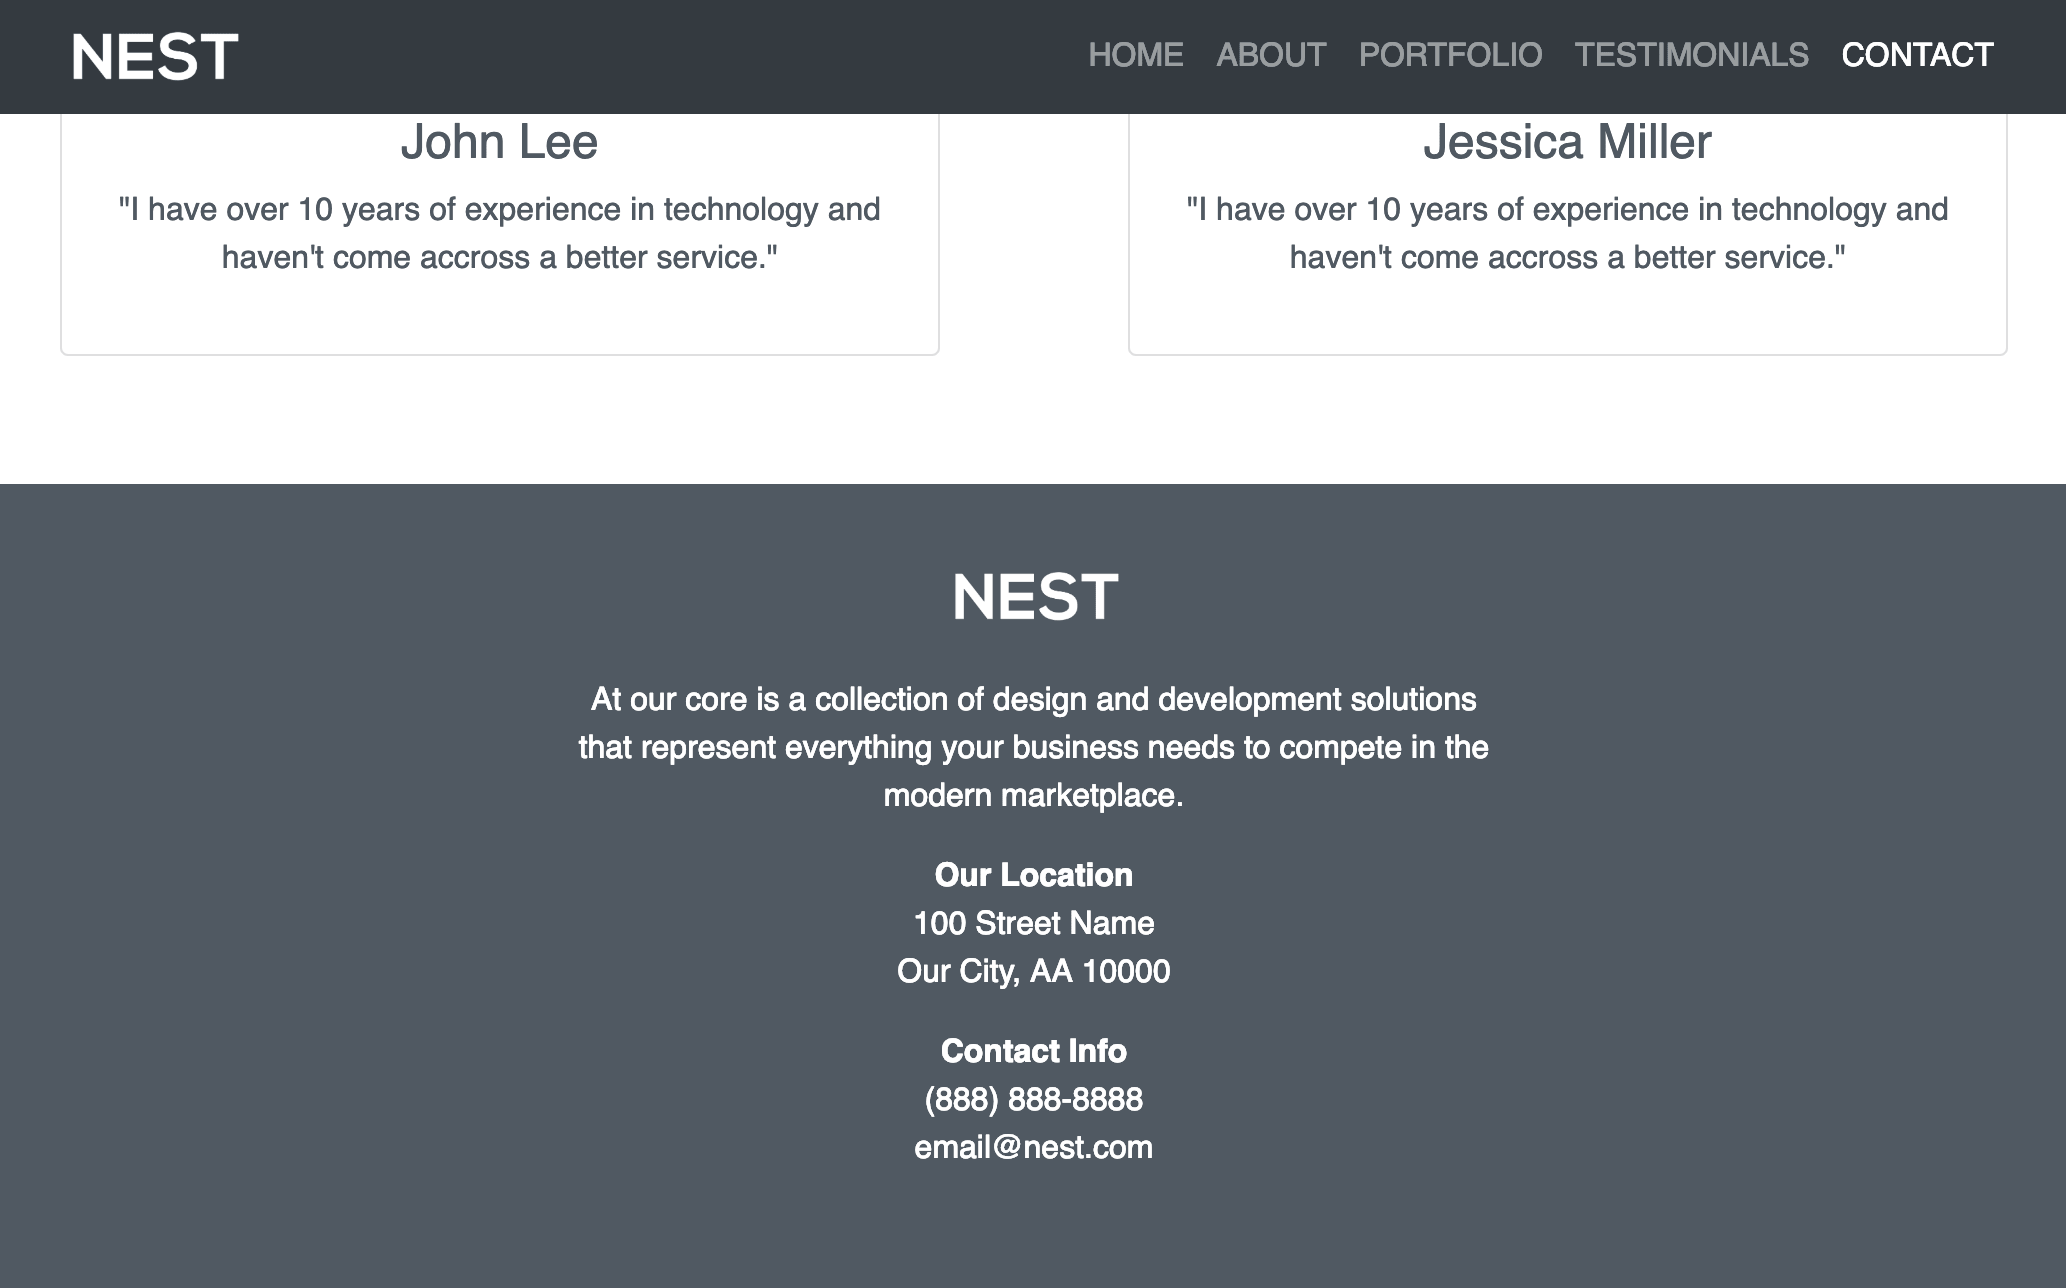 Nest Bootstrap Theme Footer Contact Section